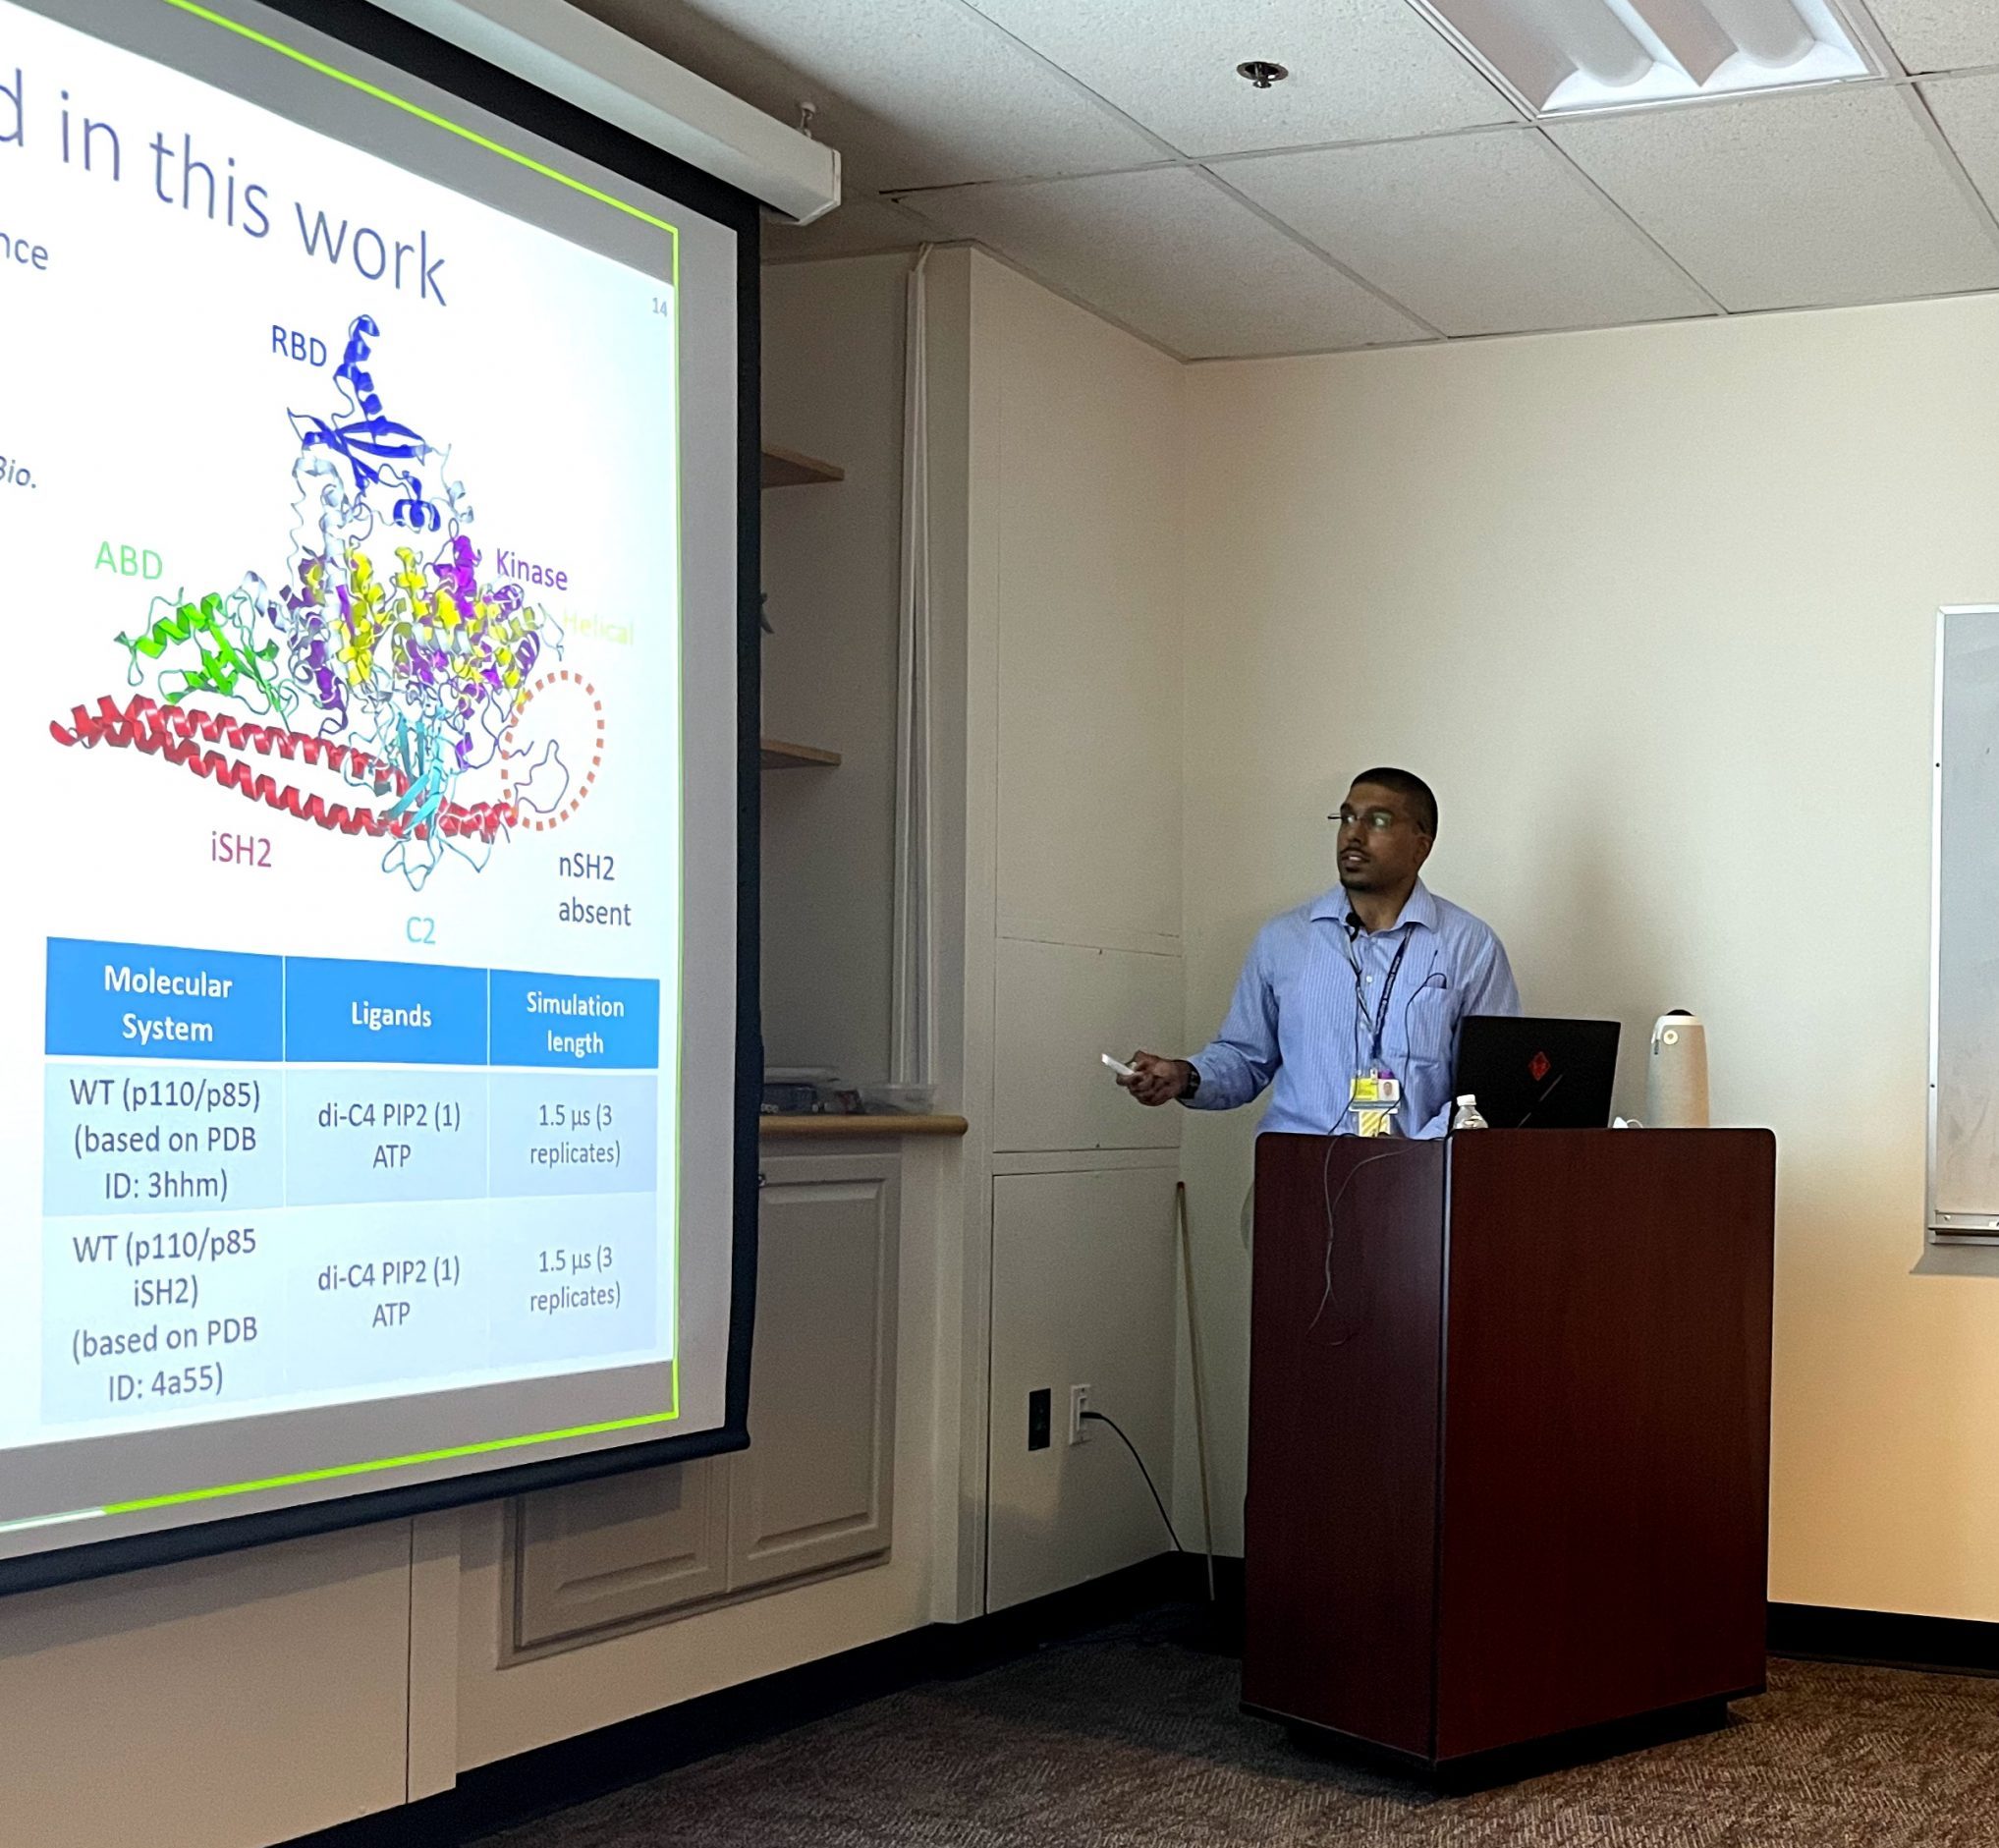 Congratulations Dr. Mayukh Chakrabarti for successfully defending his thesis!